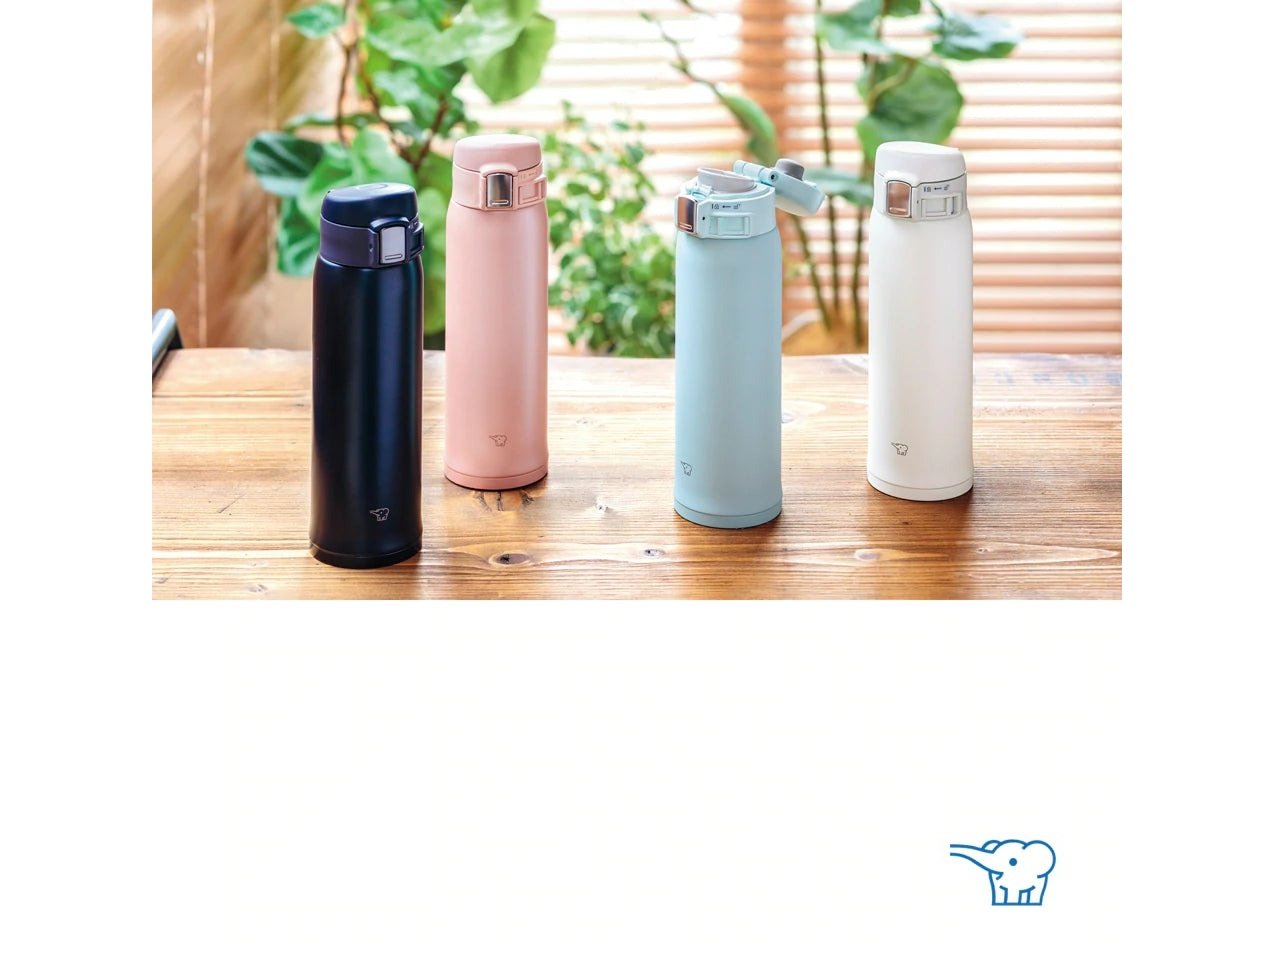 ZOJIRUSHI SM-SR One touch open vacuum insulated bottles 360, 480 & 600 ml